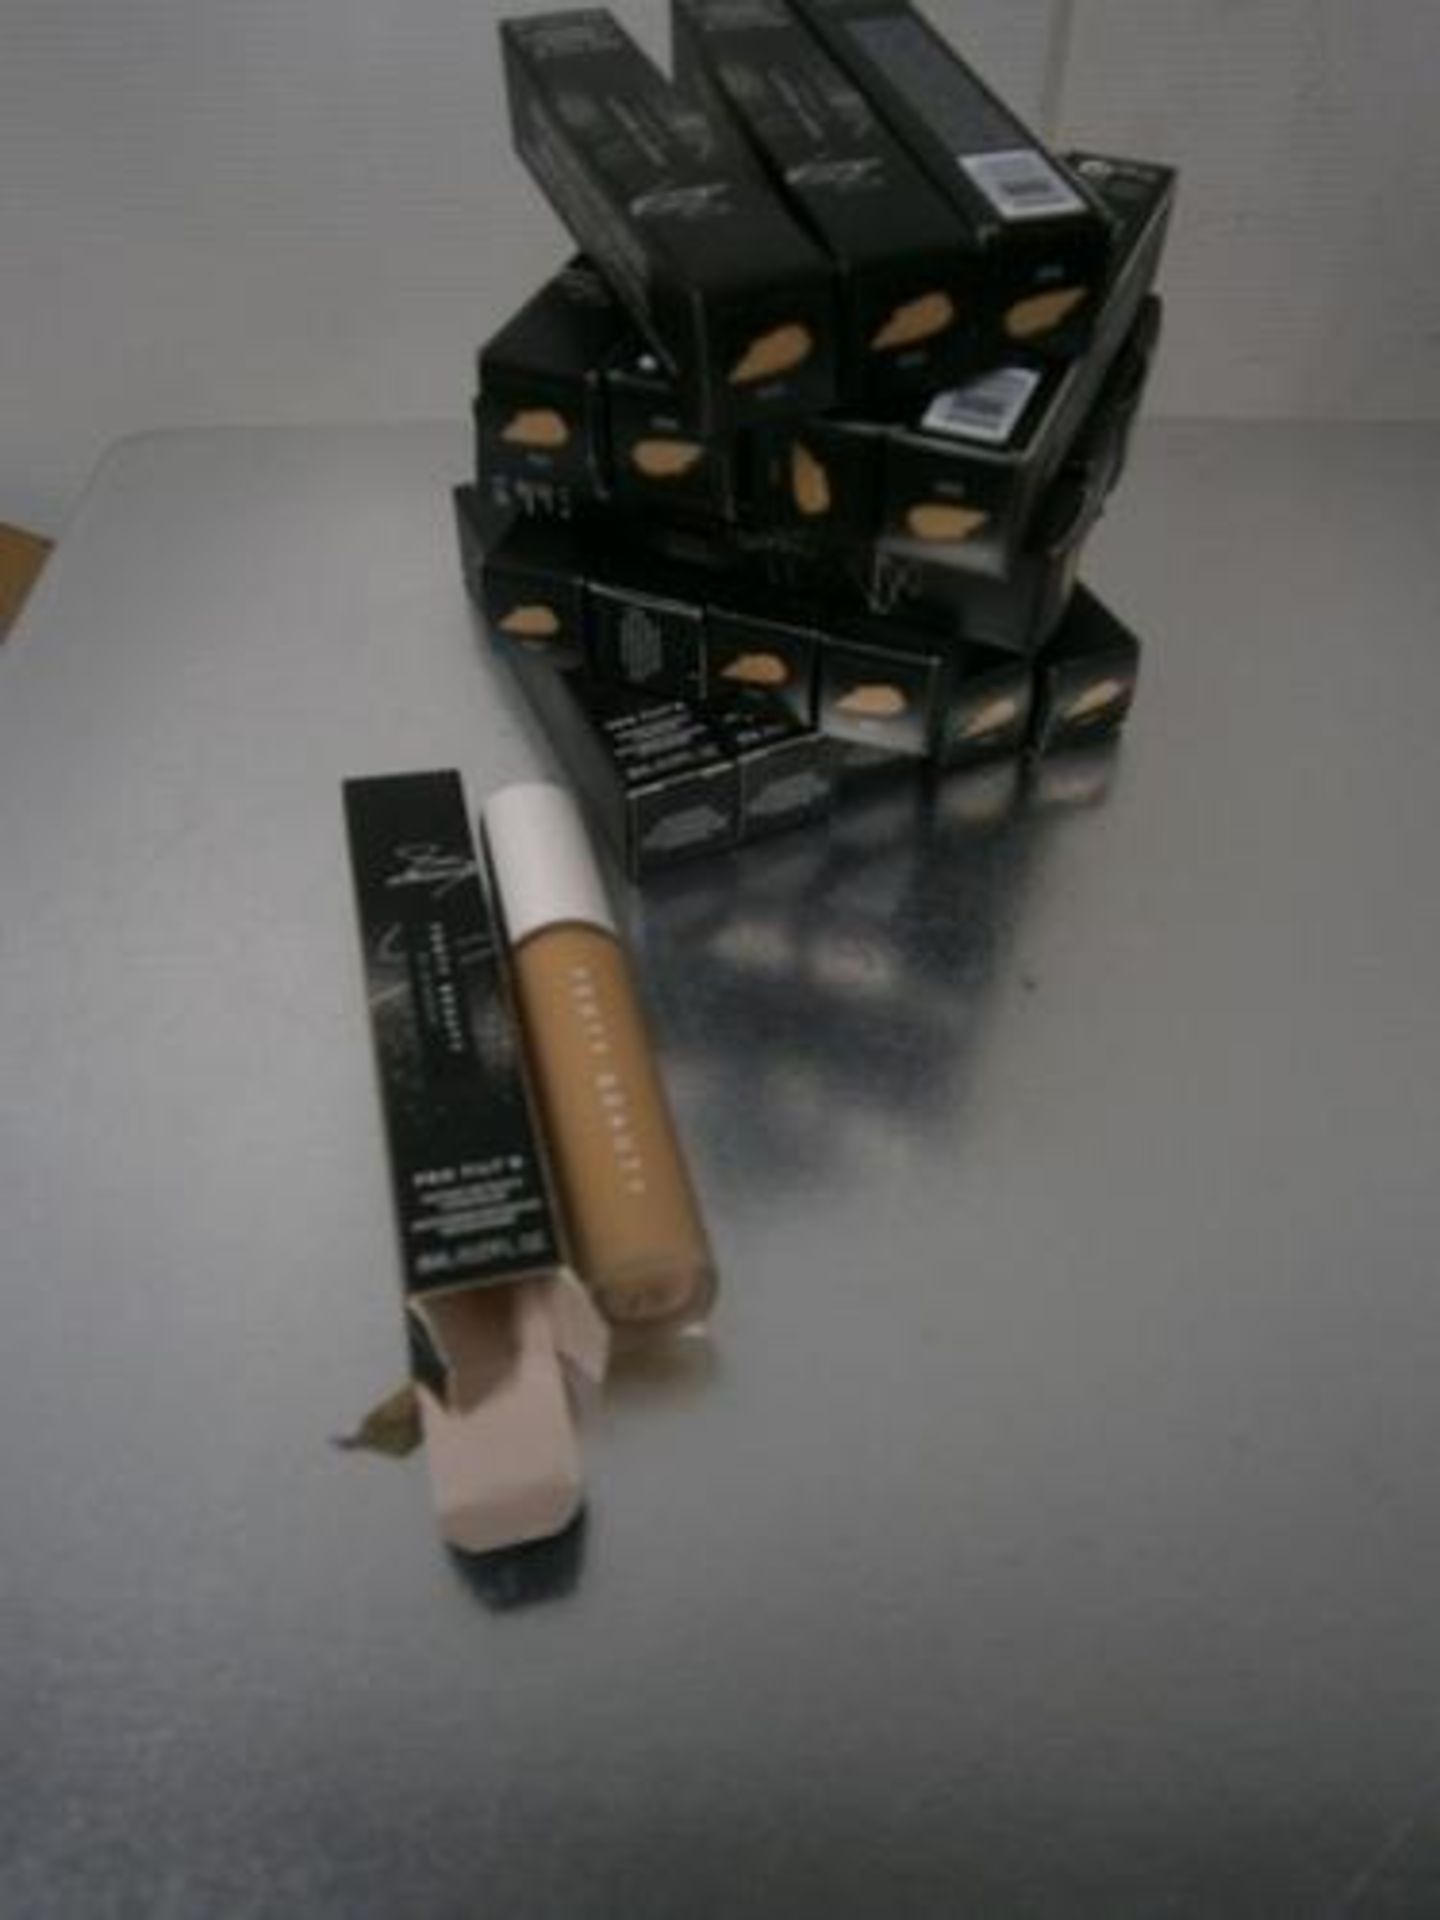 20 x 8ml boxes of Fenty Beauty concealer, shade 255 - New in box (C13C)